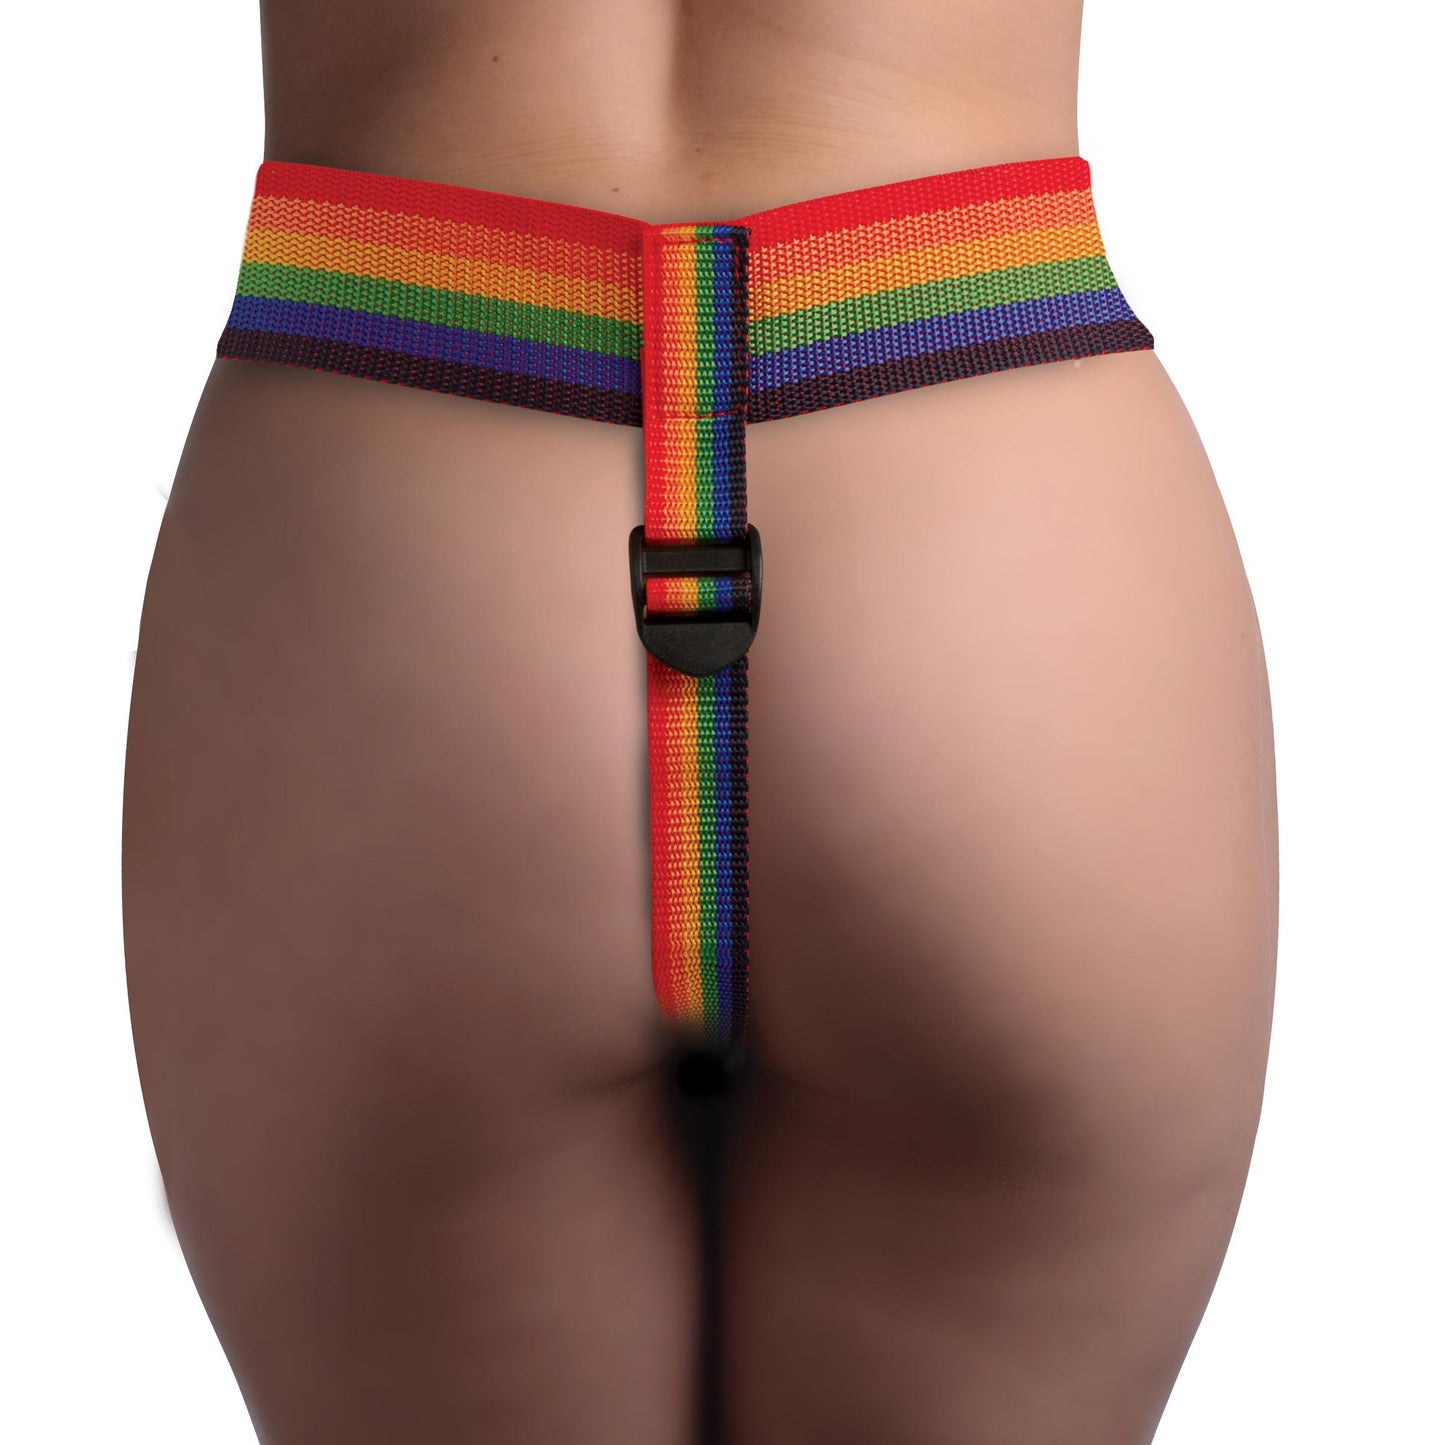 Rainbow Strap On Harness with Silicone O-Rings - UABDSM